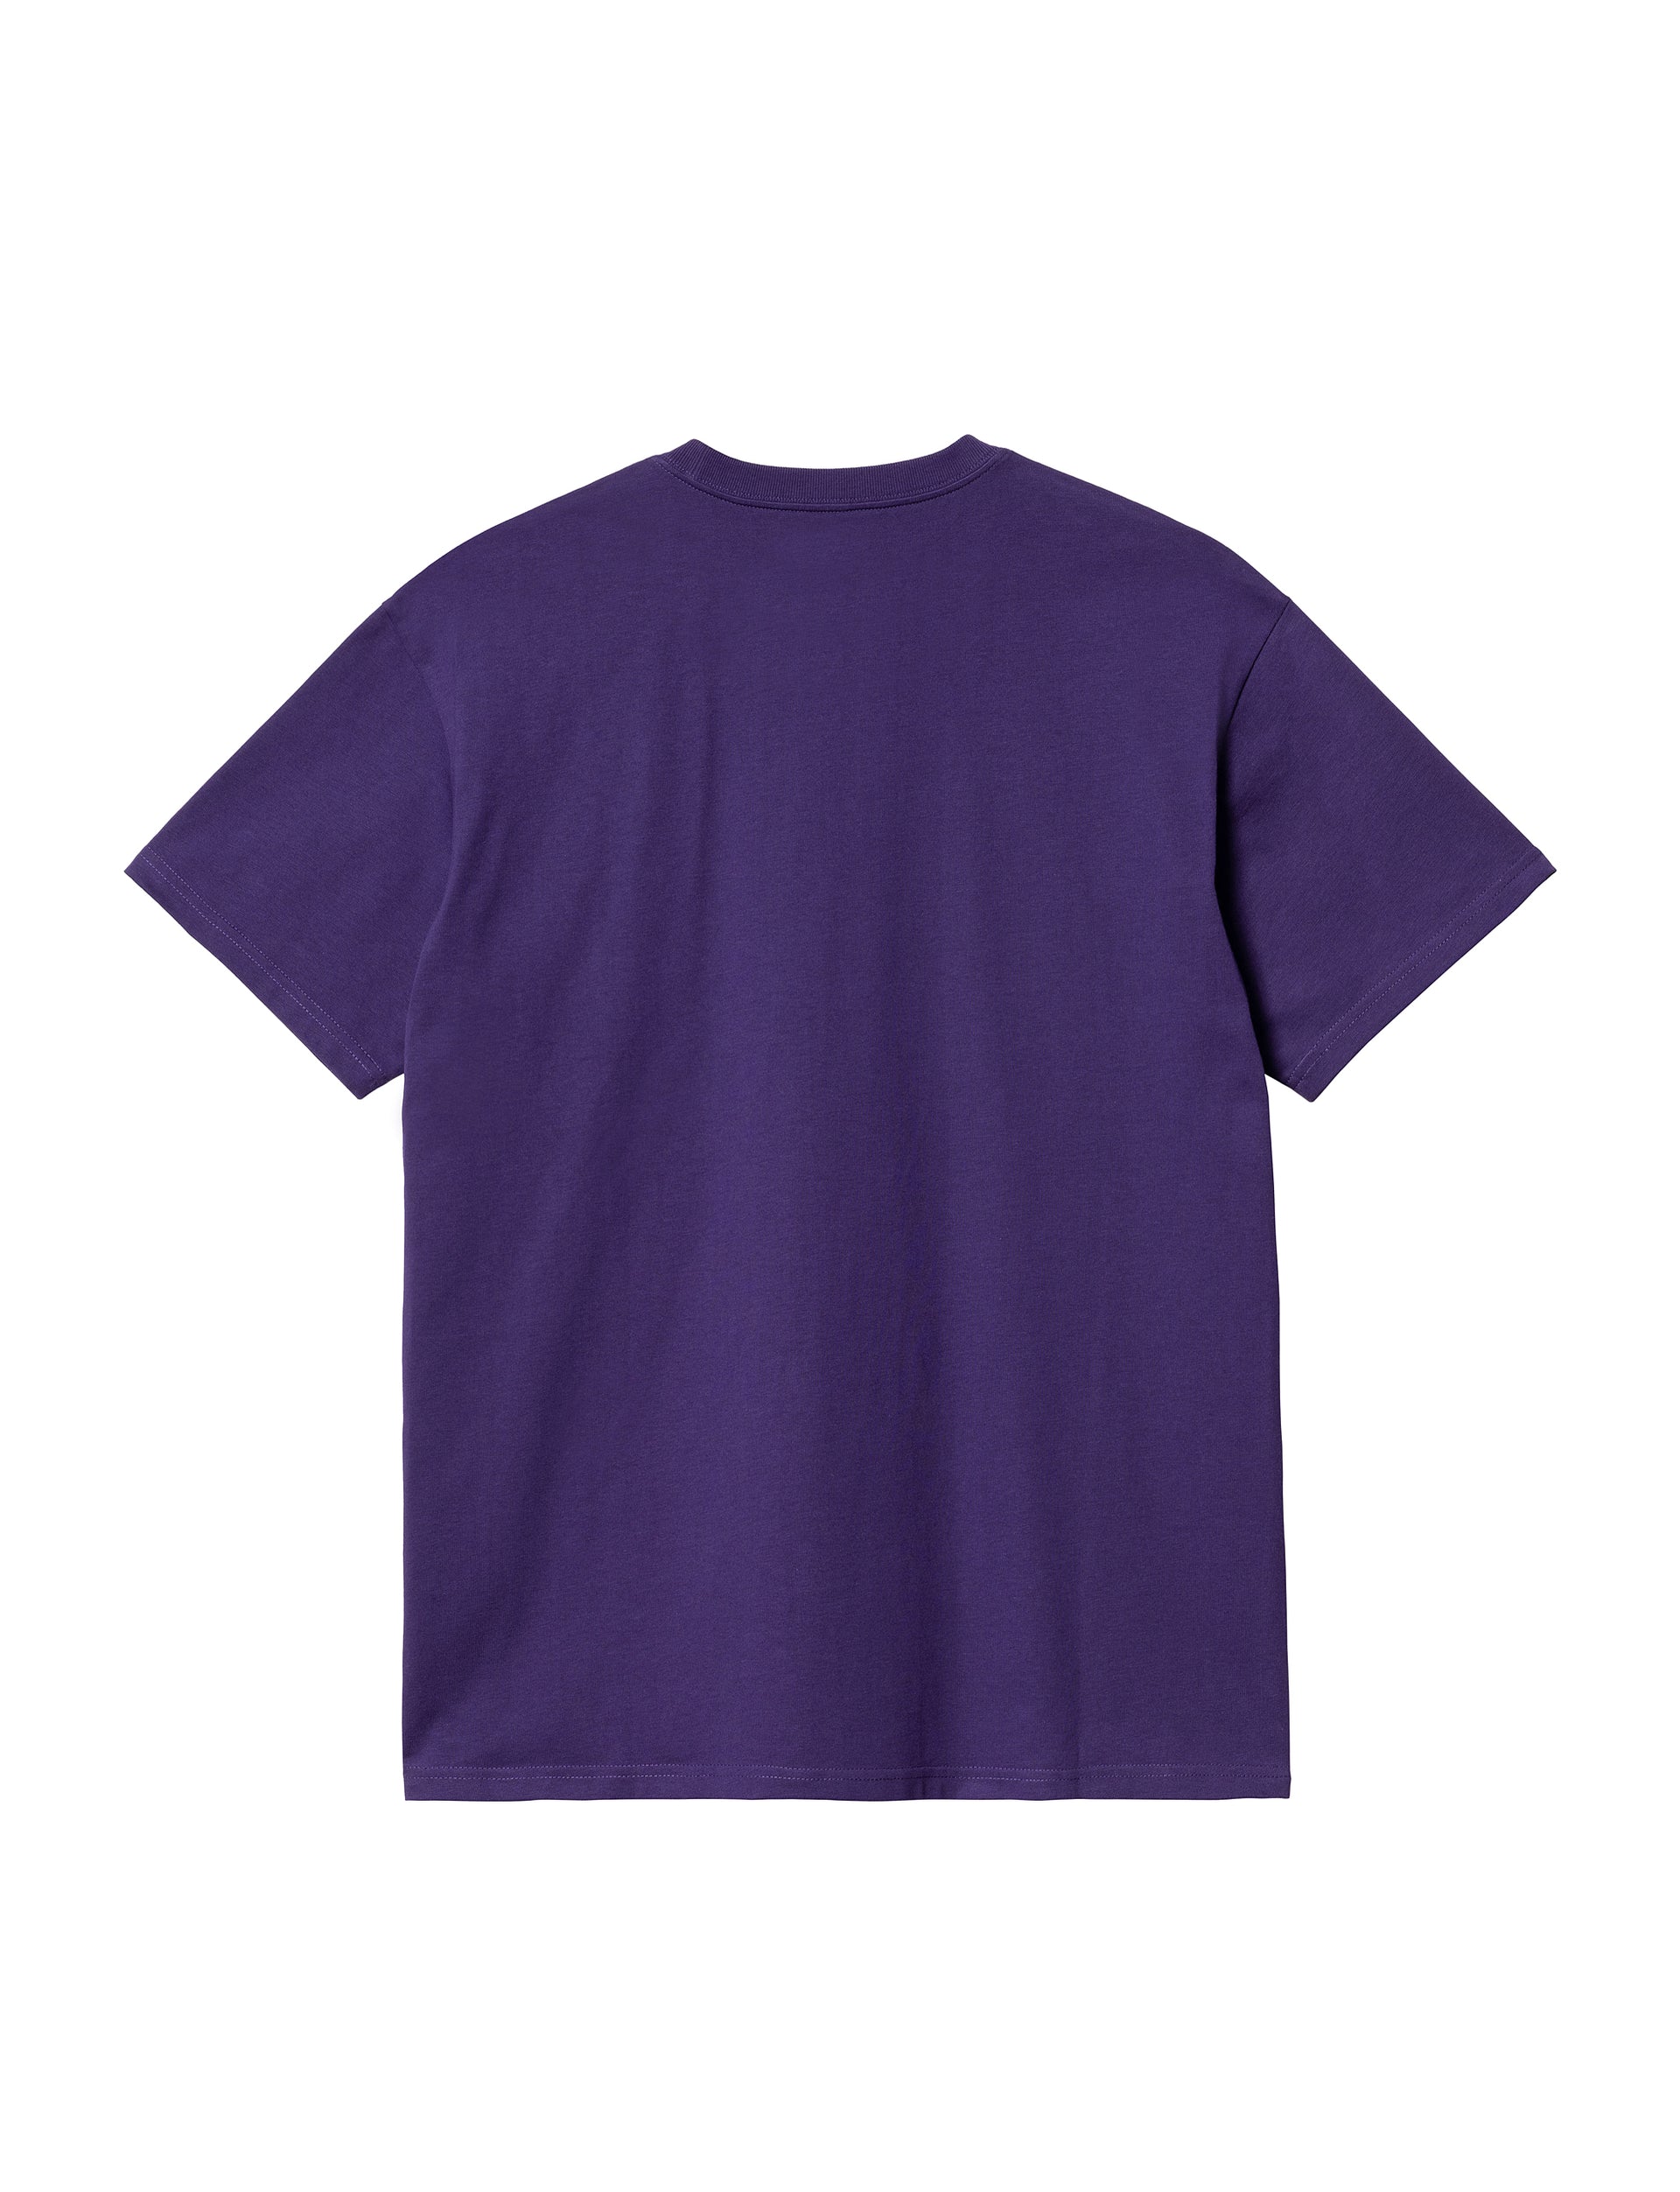 CARHARTT WIP S/S CHASE T-SHIRT TYRIAN